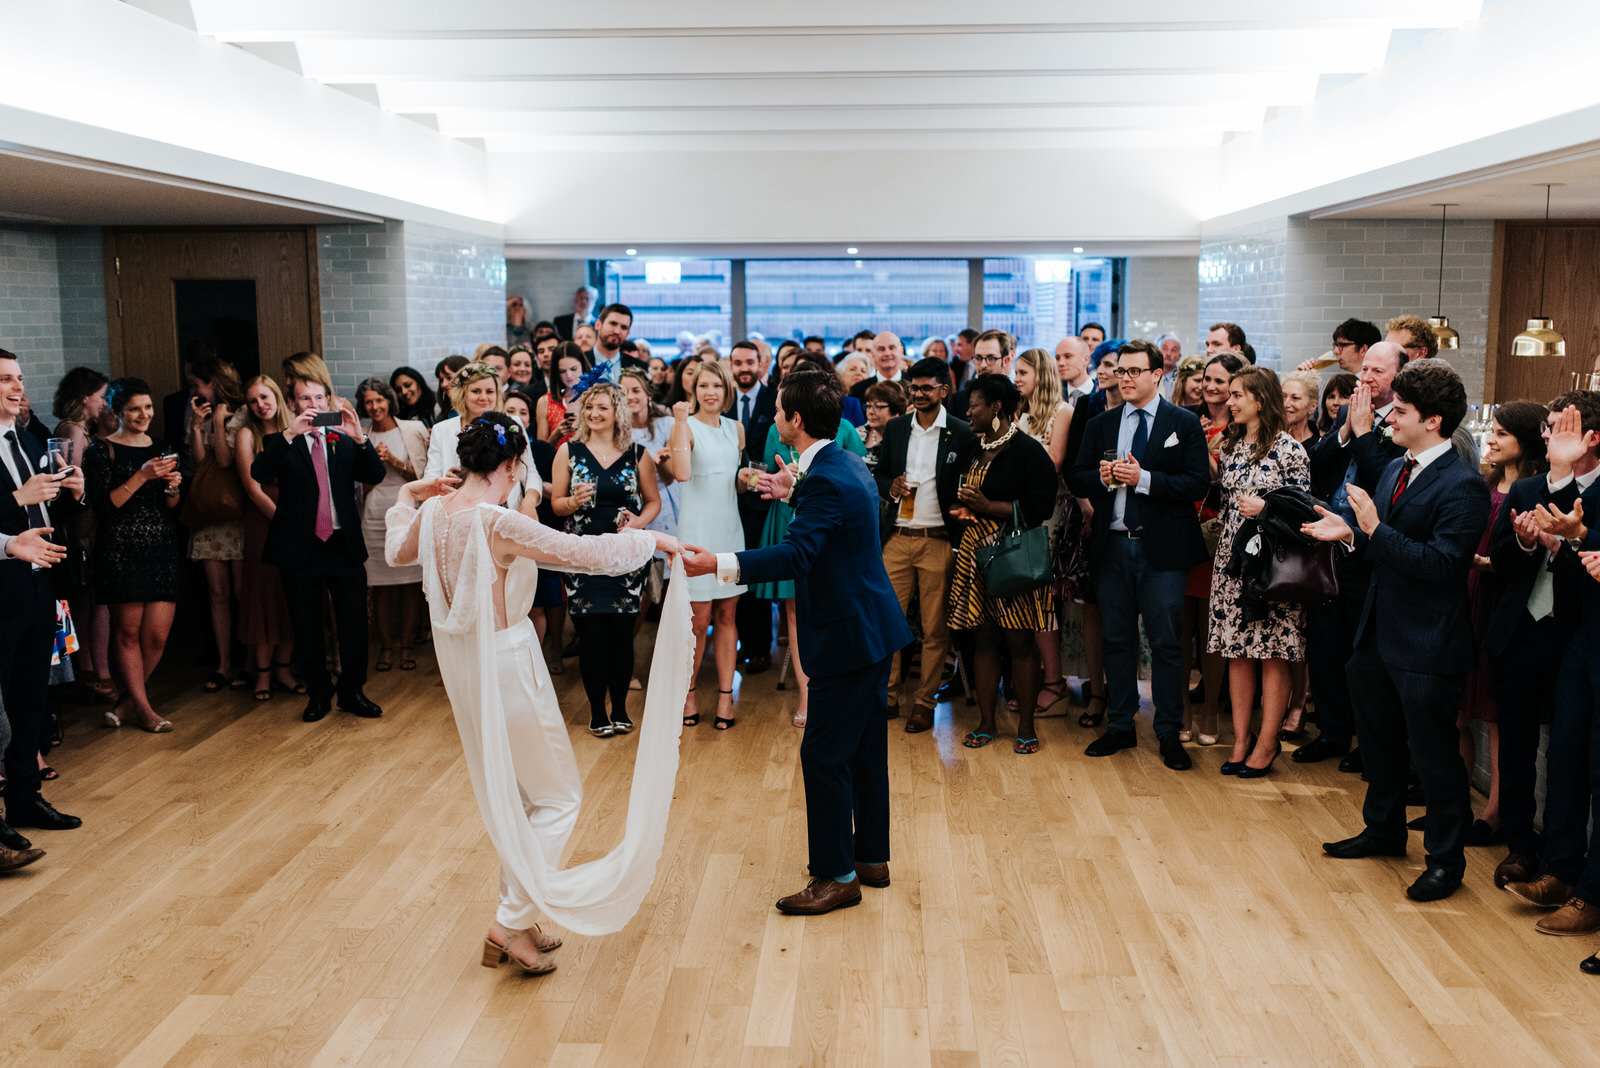 Bride and groom have their first dance in front of guests at Wes